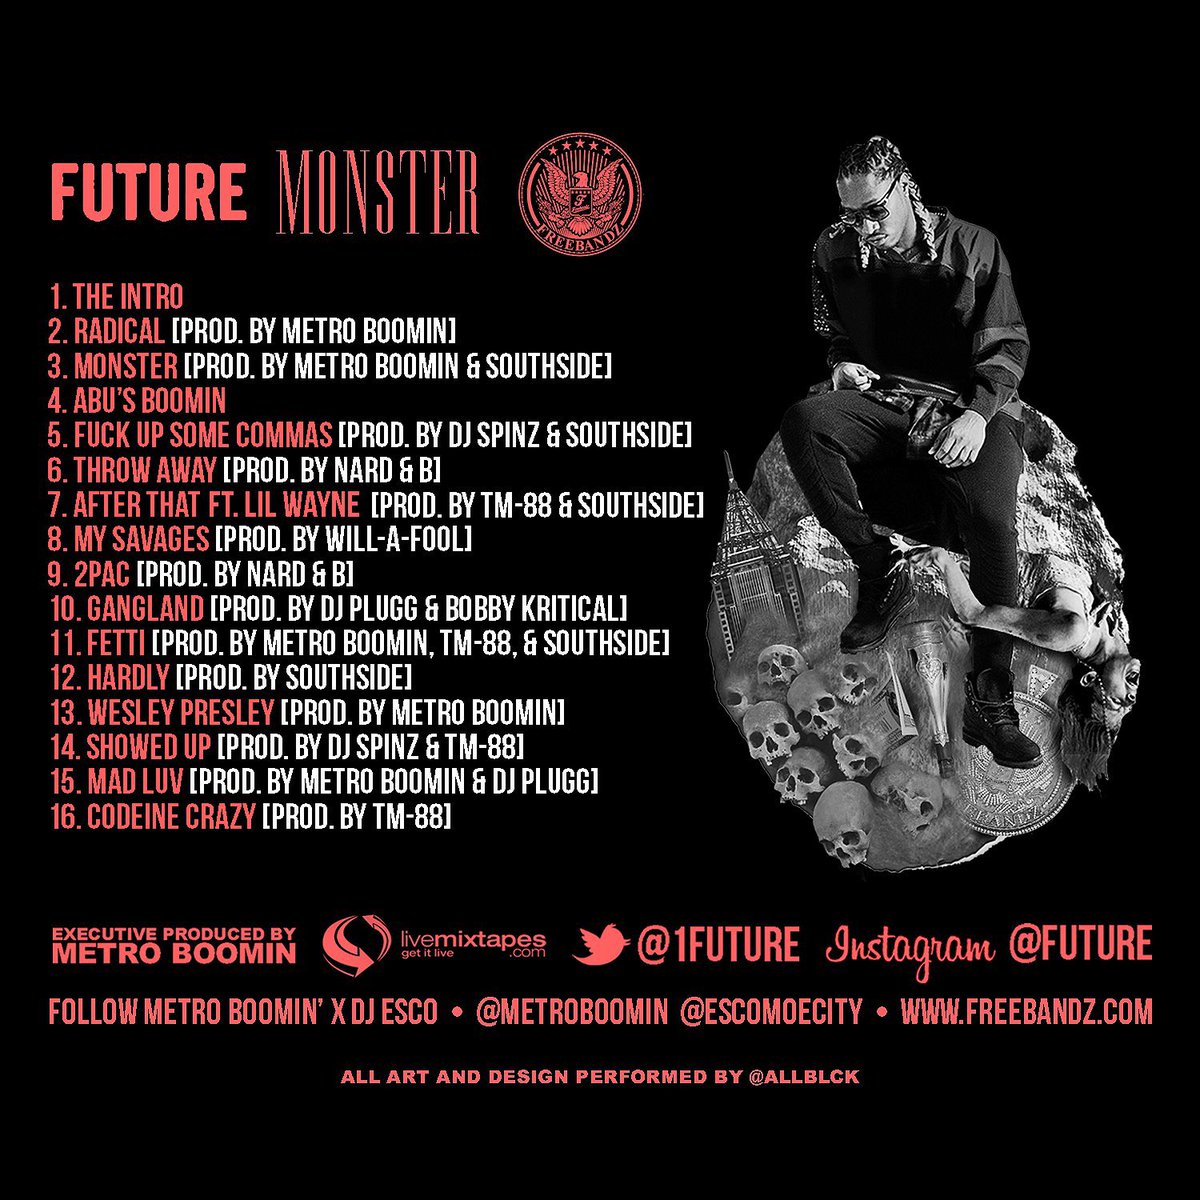 8 years ago today, Future dropped his 13th mixtape “MONSTER” Executively produced by @MetroBoomin , Future left earth on this but he really snapped on songs “Fetti”, “Gangland”, “Hardly”, and “Codeine Crazy” making this 1 of his Best tapes. What’s your fav beat on this? 🤔